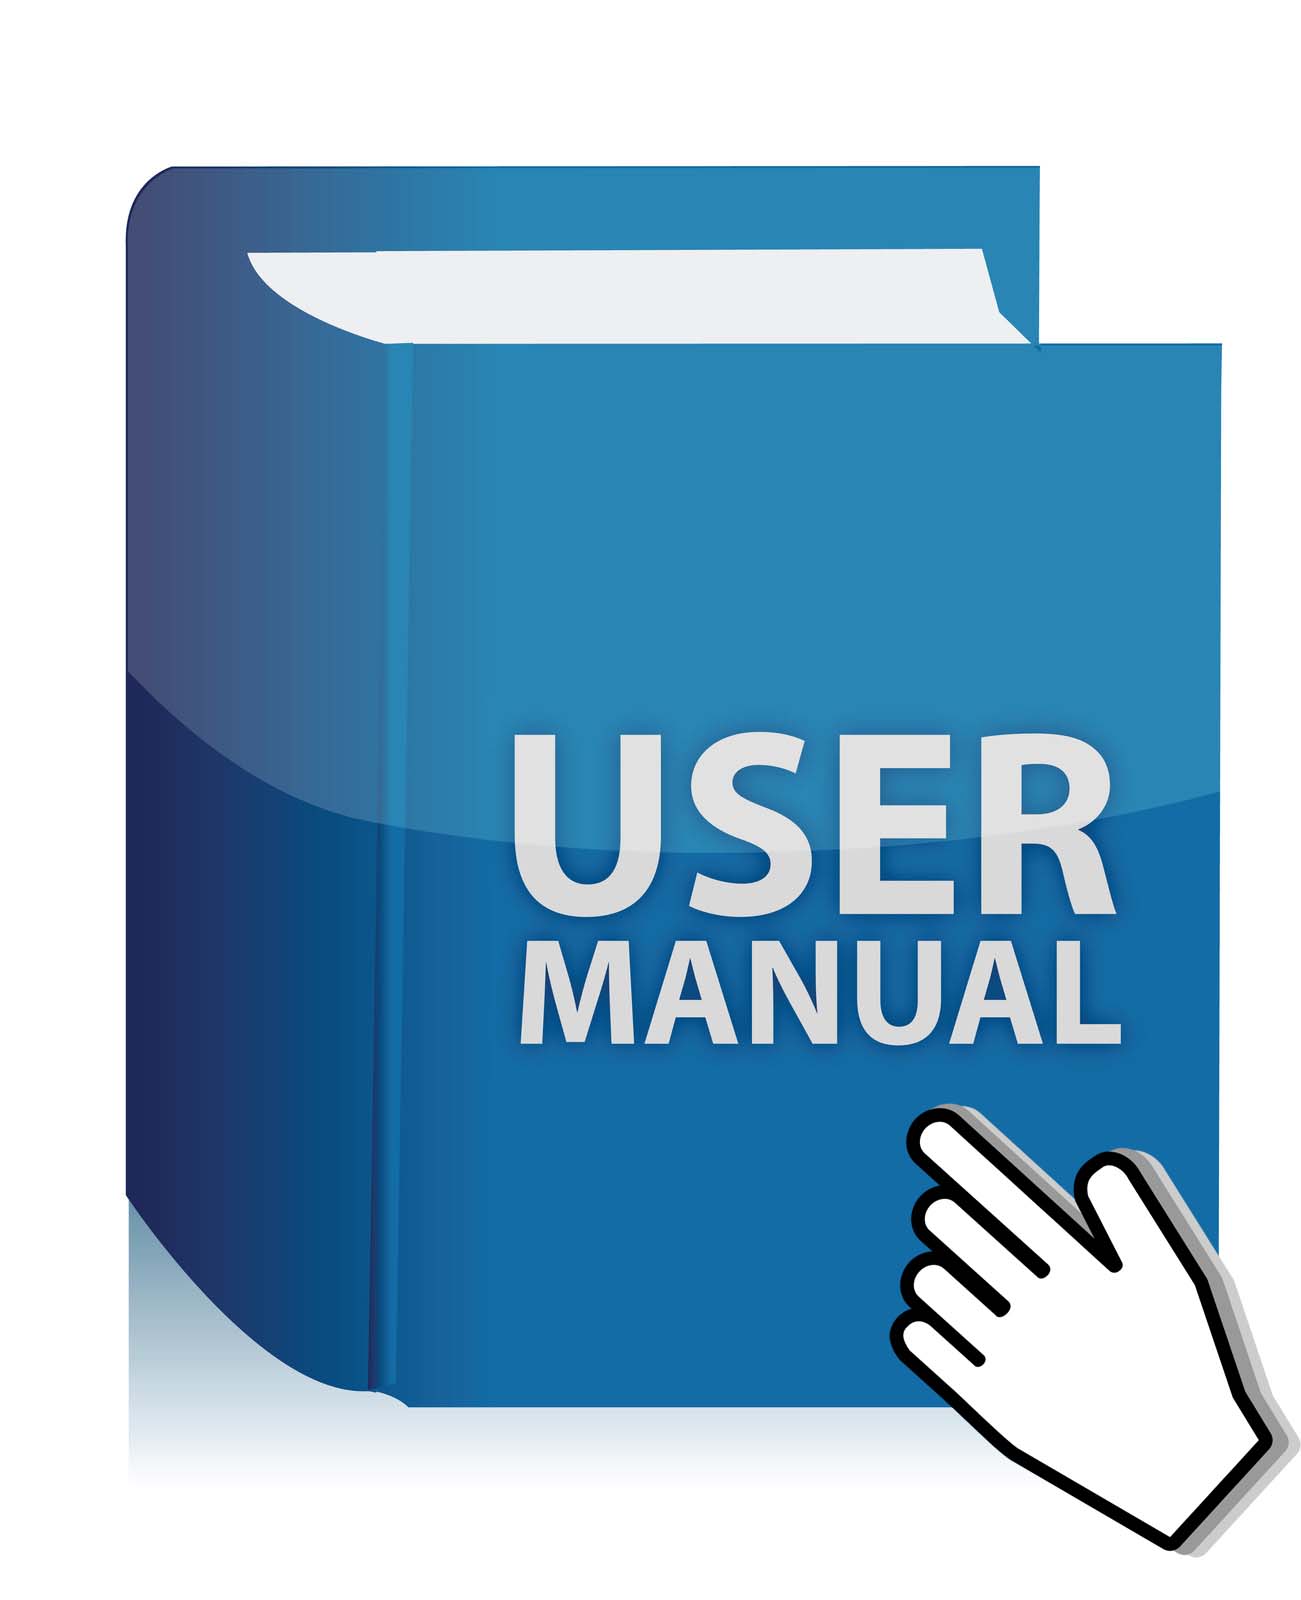 owner's manual icon